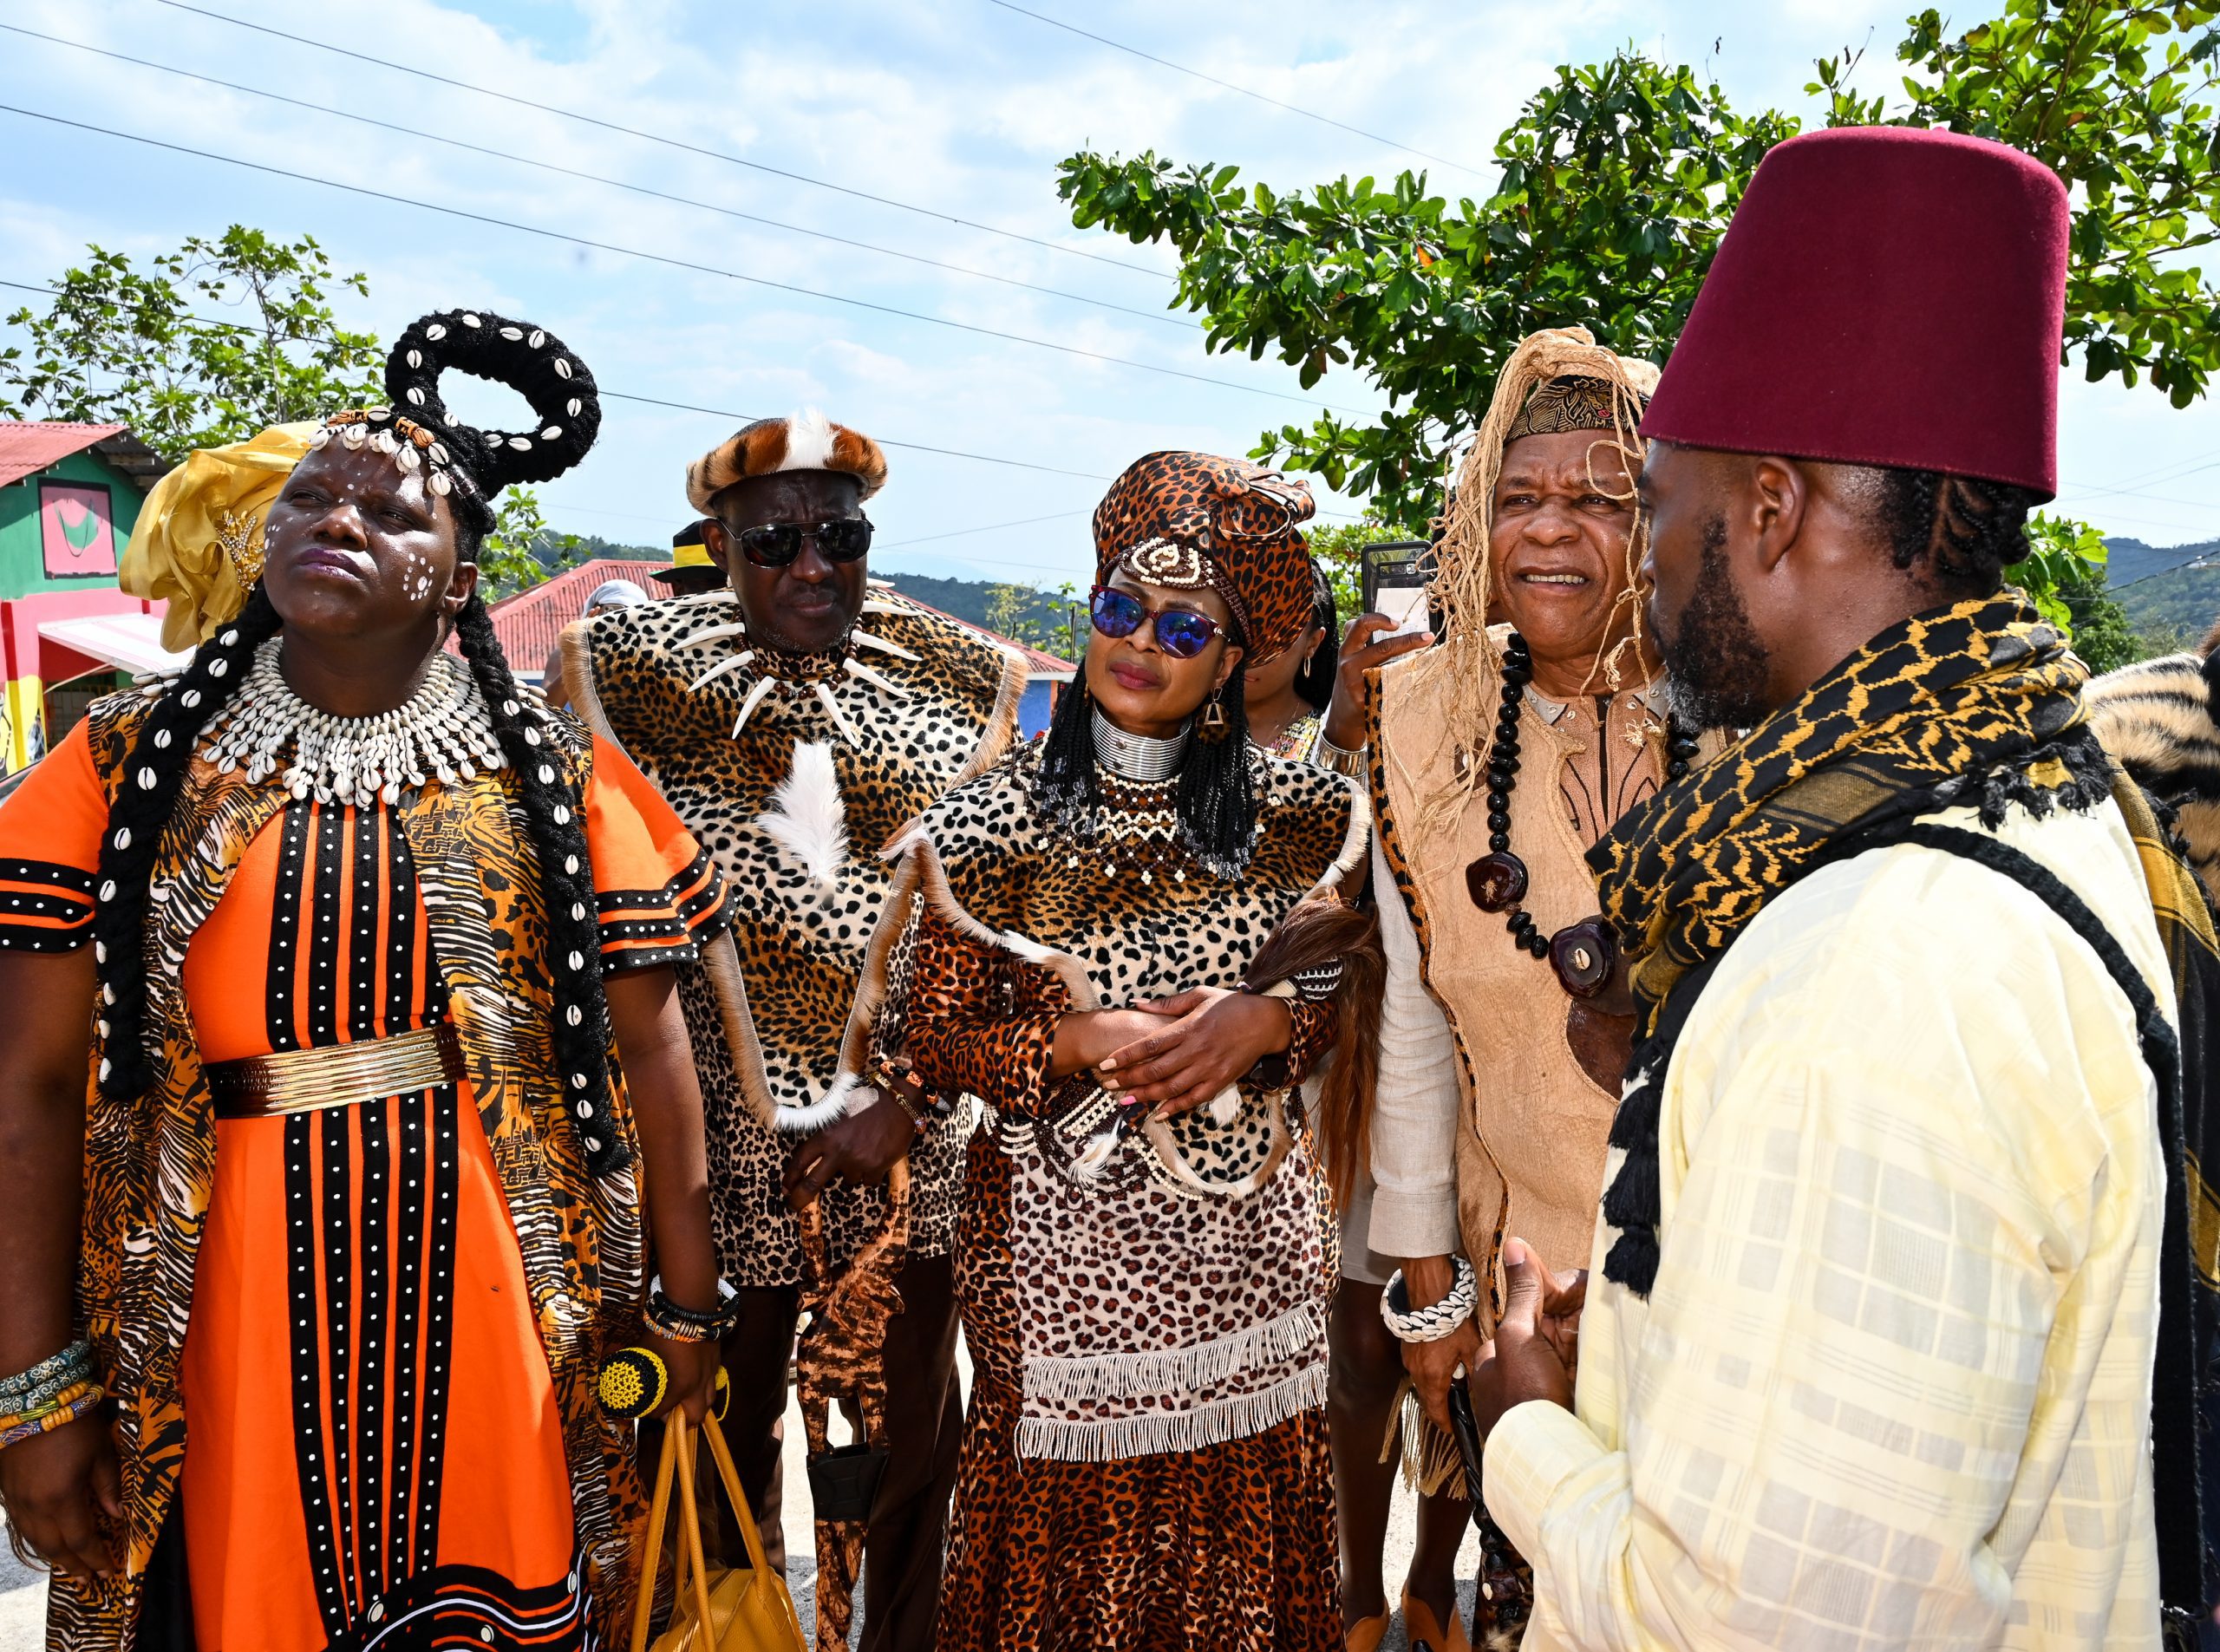 African Royal Delegation Visit To The Sovereign State Of Accompong For Treaty Day Celebrations And Appleton Estate Tour – 1 March 2023